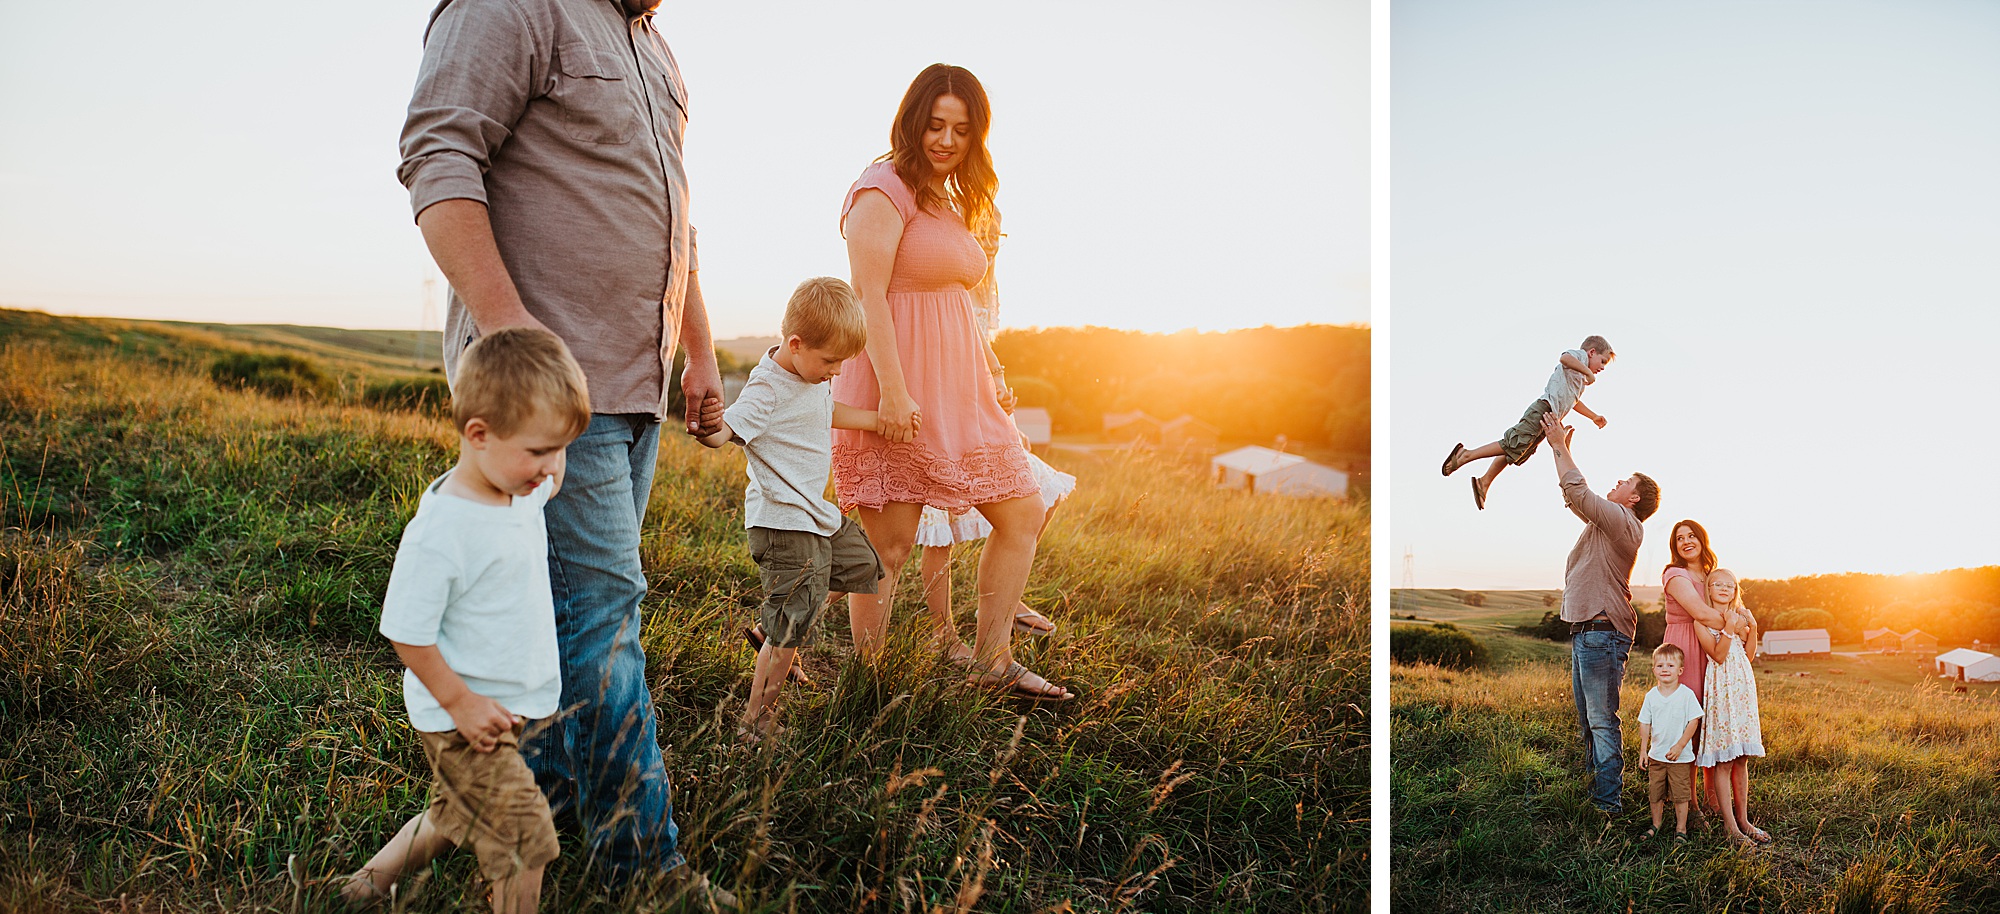 Family walking through pasture wearing a mix of pastel and neutral colors.